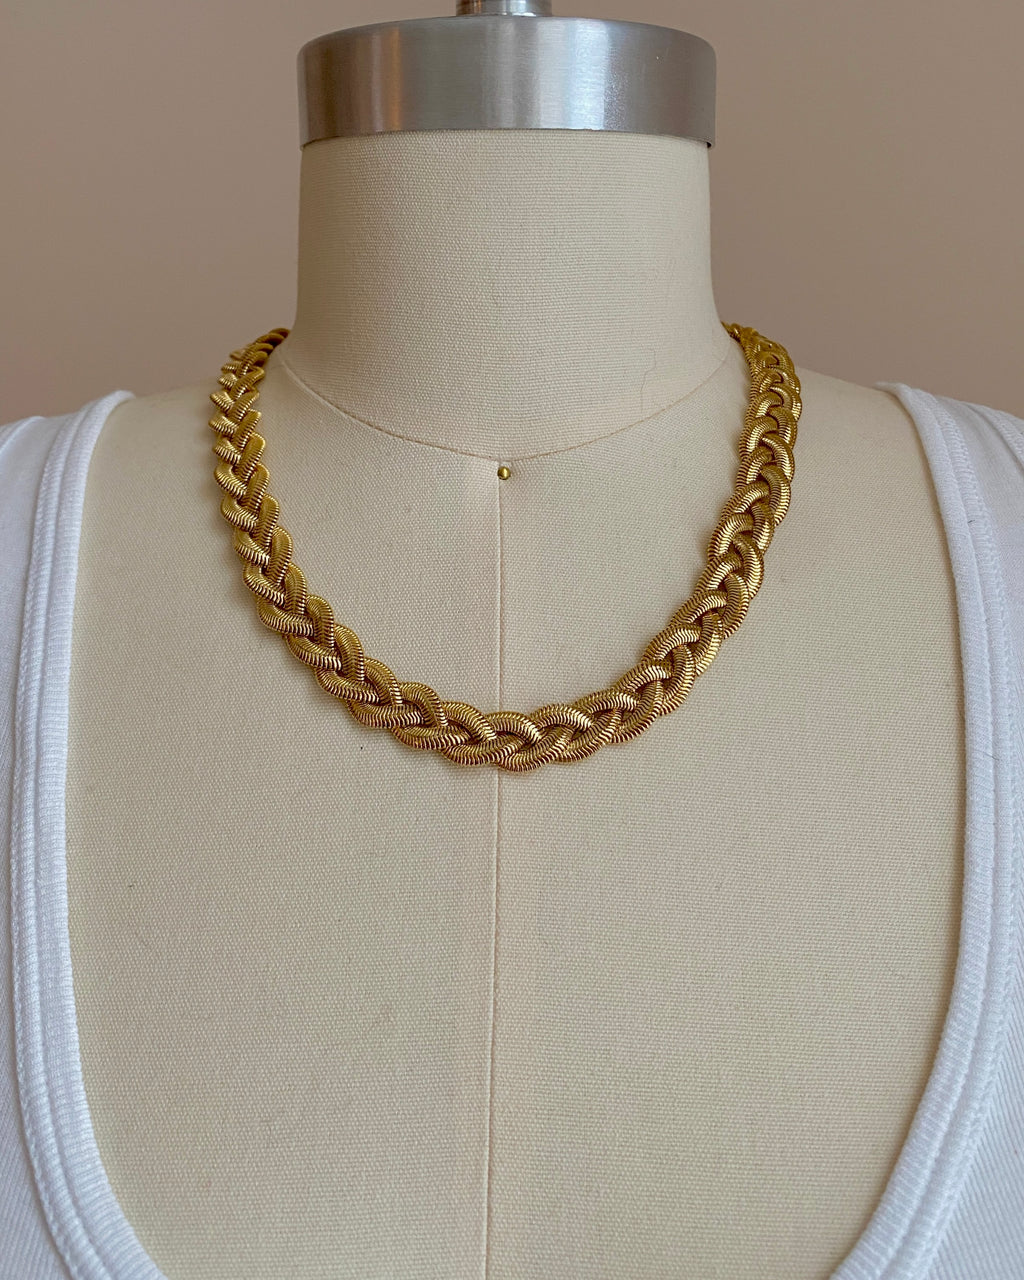 Vintage 1980s Gold Tone Snake Herringbone Chain Braided Necklace